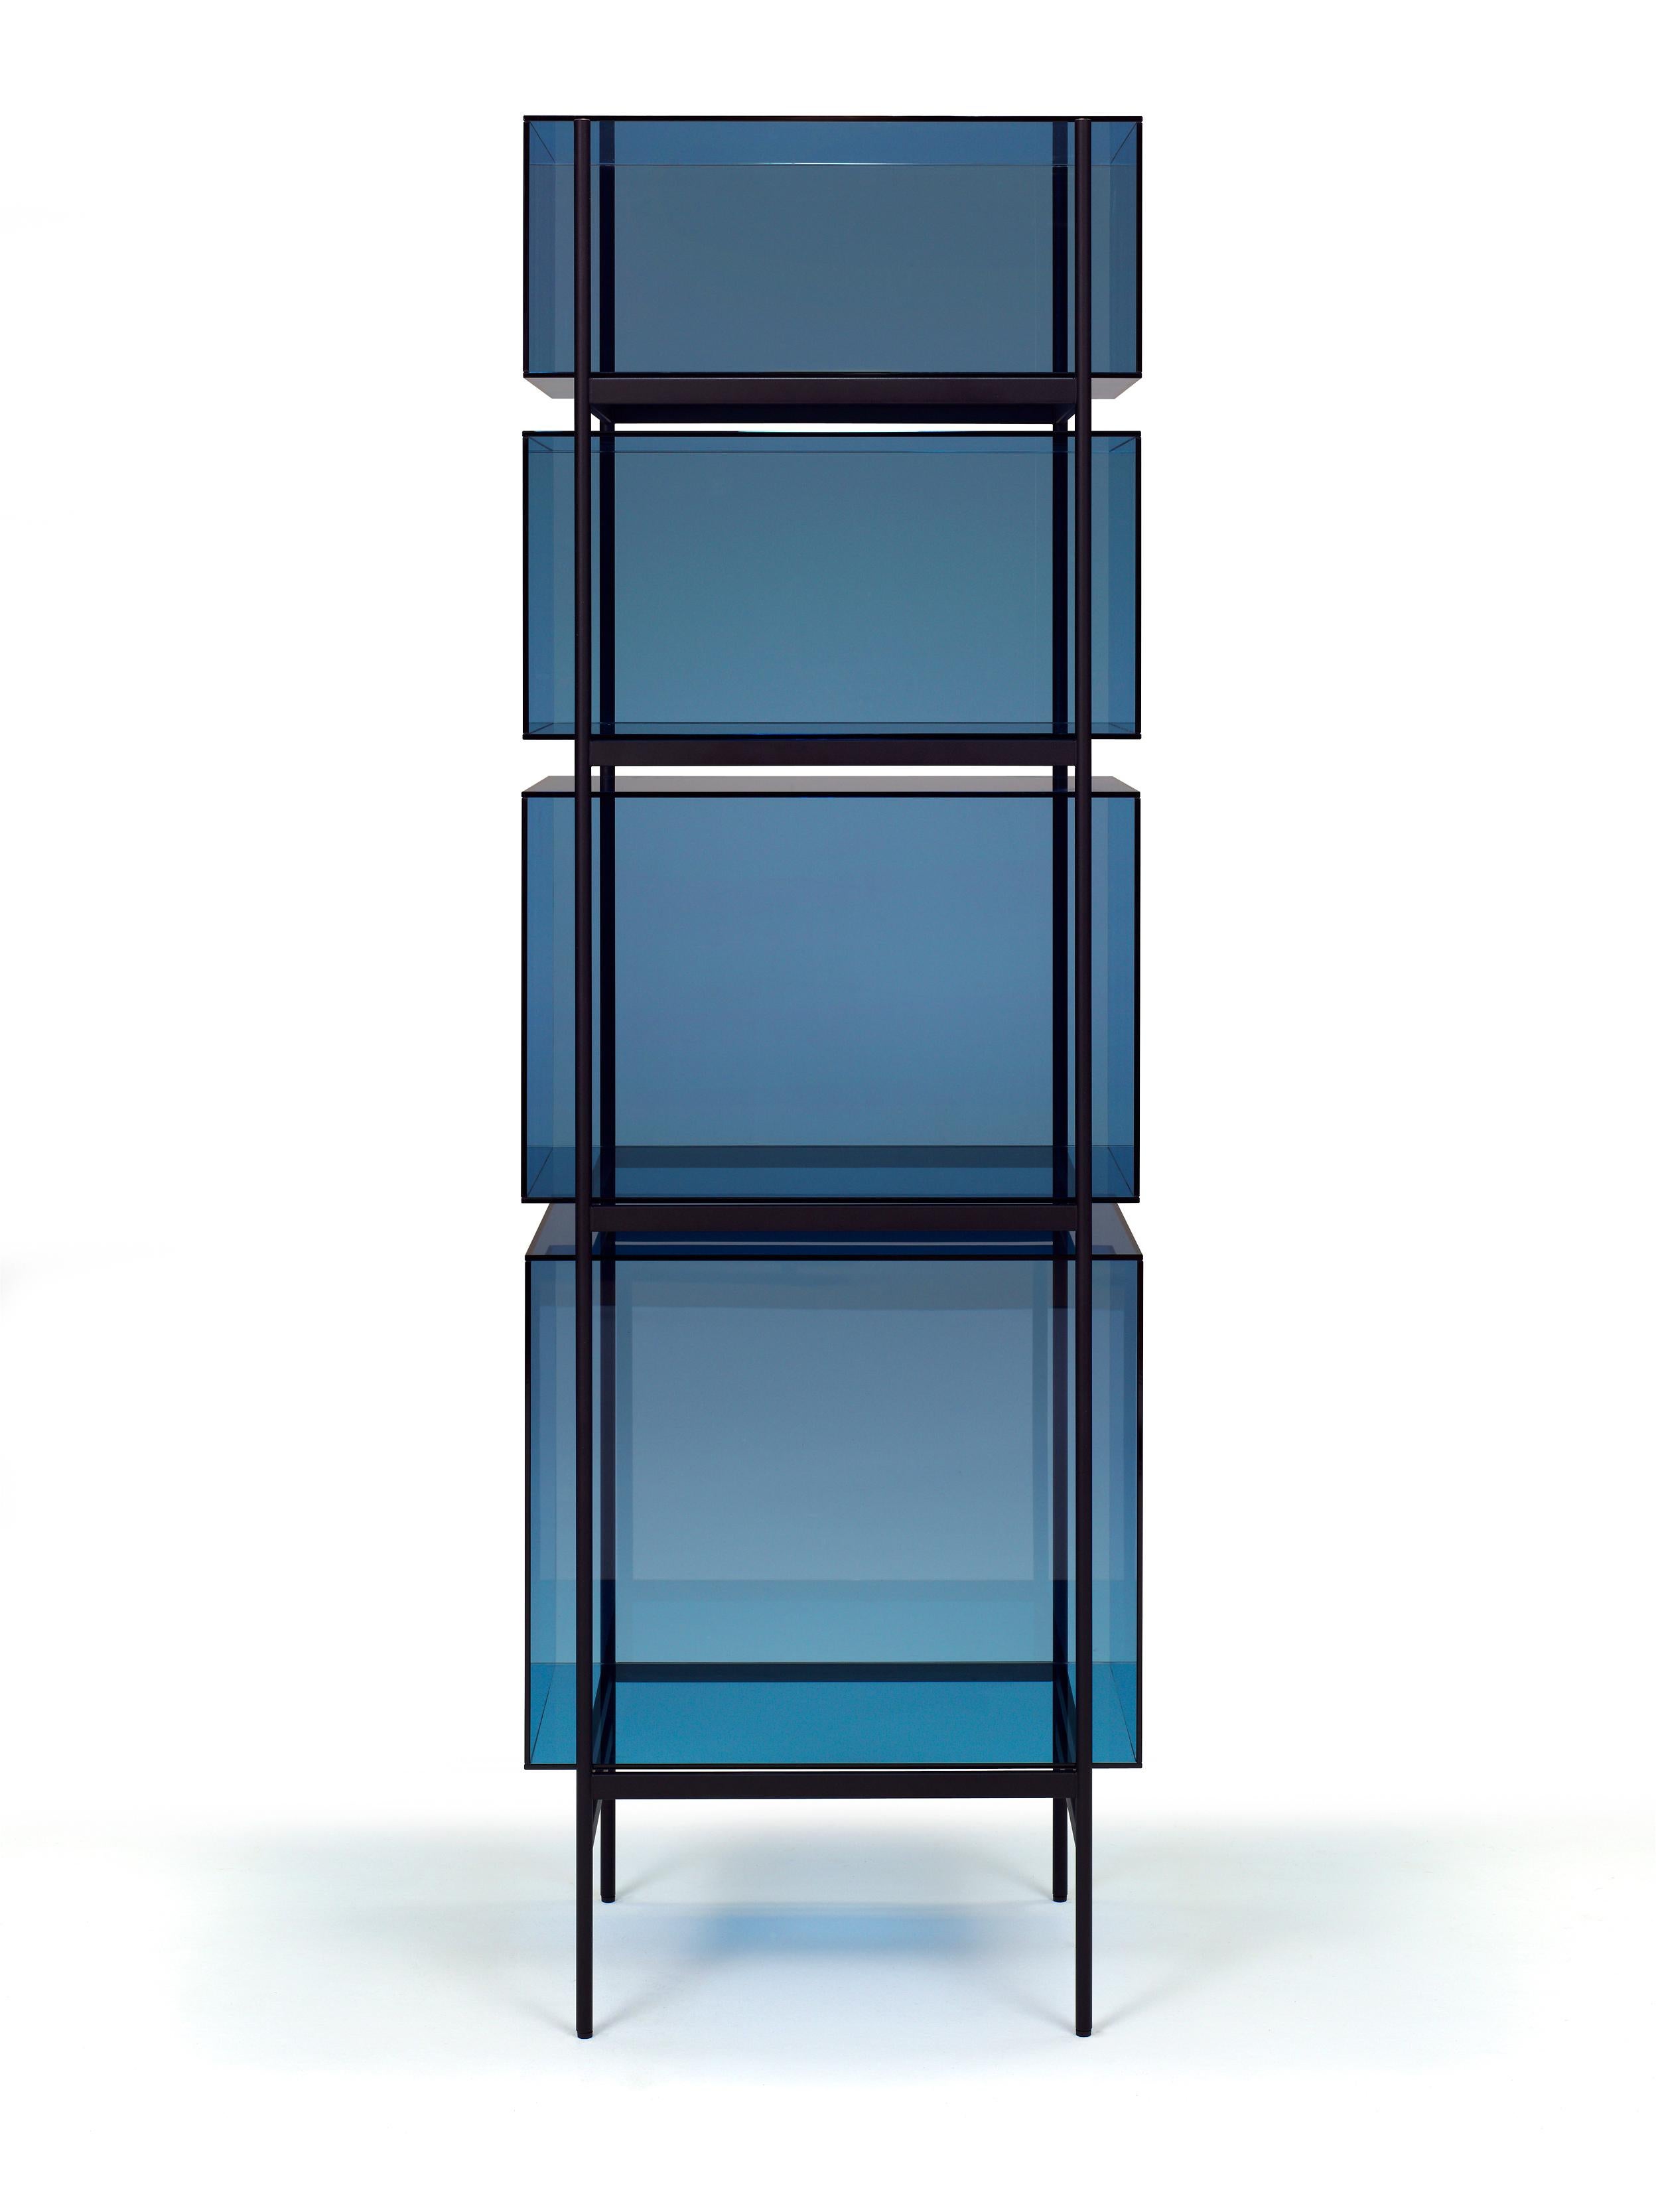 Lyn high blue black cabinet by Pulpo
Dimensions: D60 x W45 x H185 cm
Materials: Glass; powder coated steel.

Also available in different colours. 

Studio Visser & Meijwaard describe their conception of lyn as a “graphic interplay between